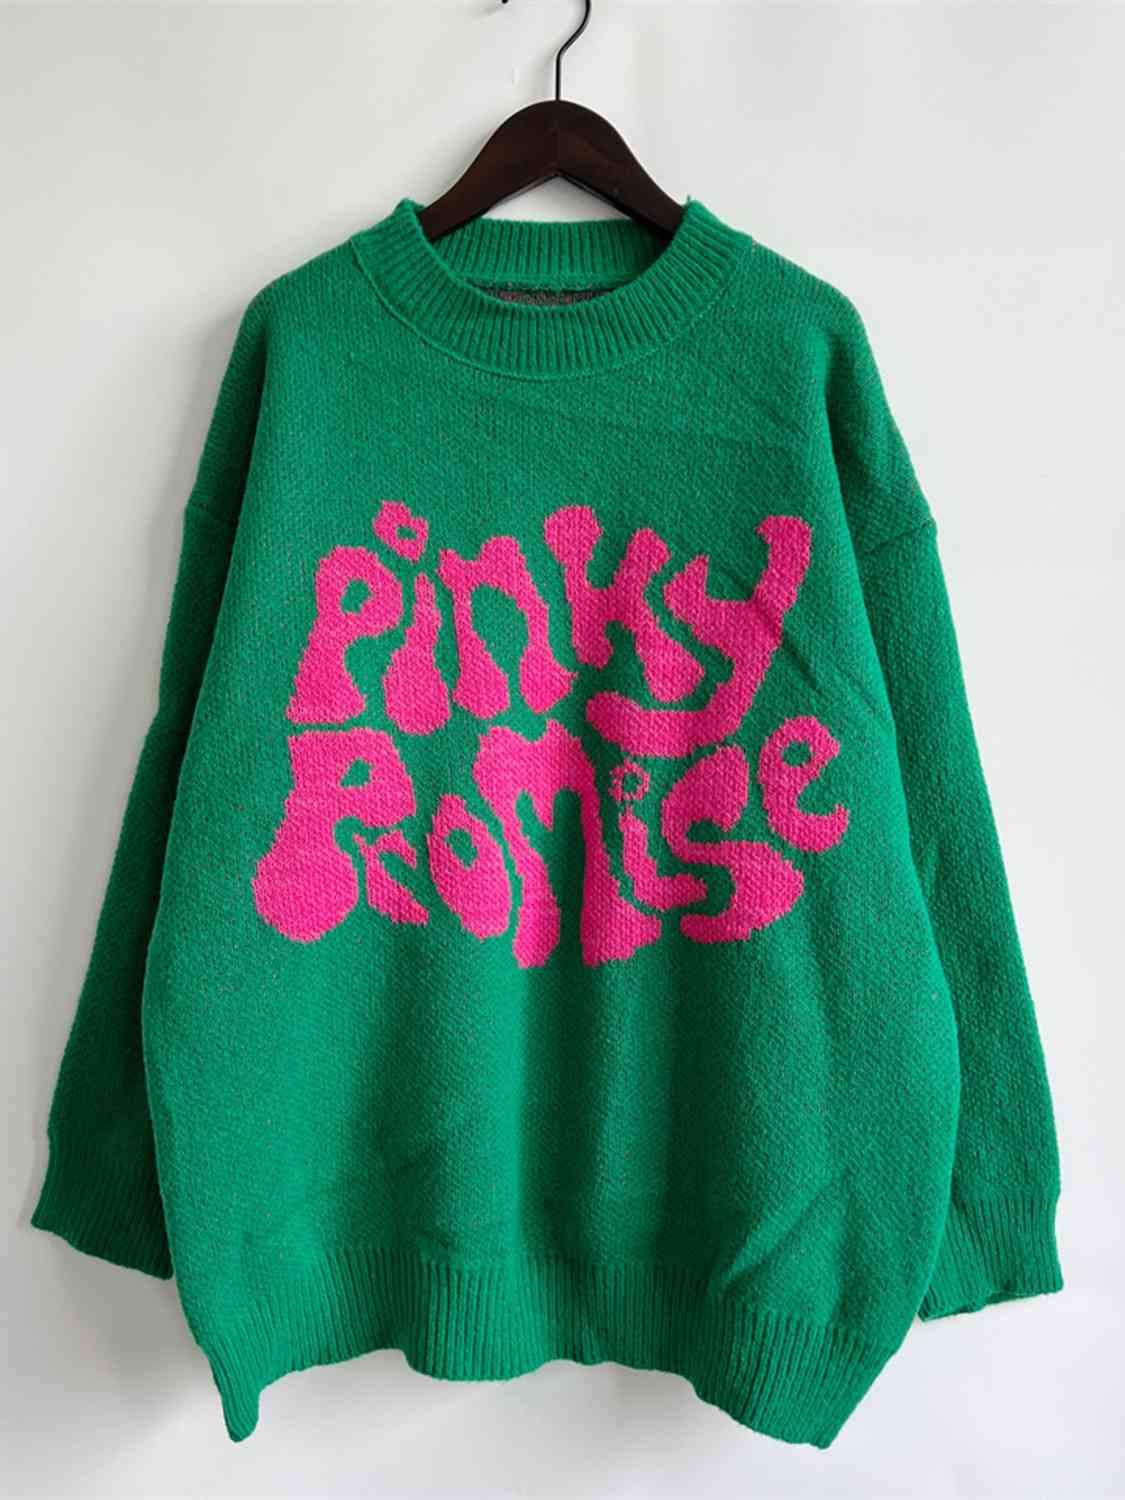 PINKY PROMISE Graphic Sweater - Sweaters - Shirts & Tops - 5 - 2024